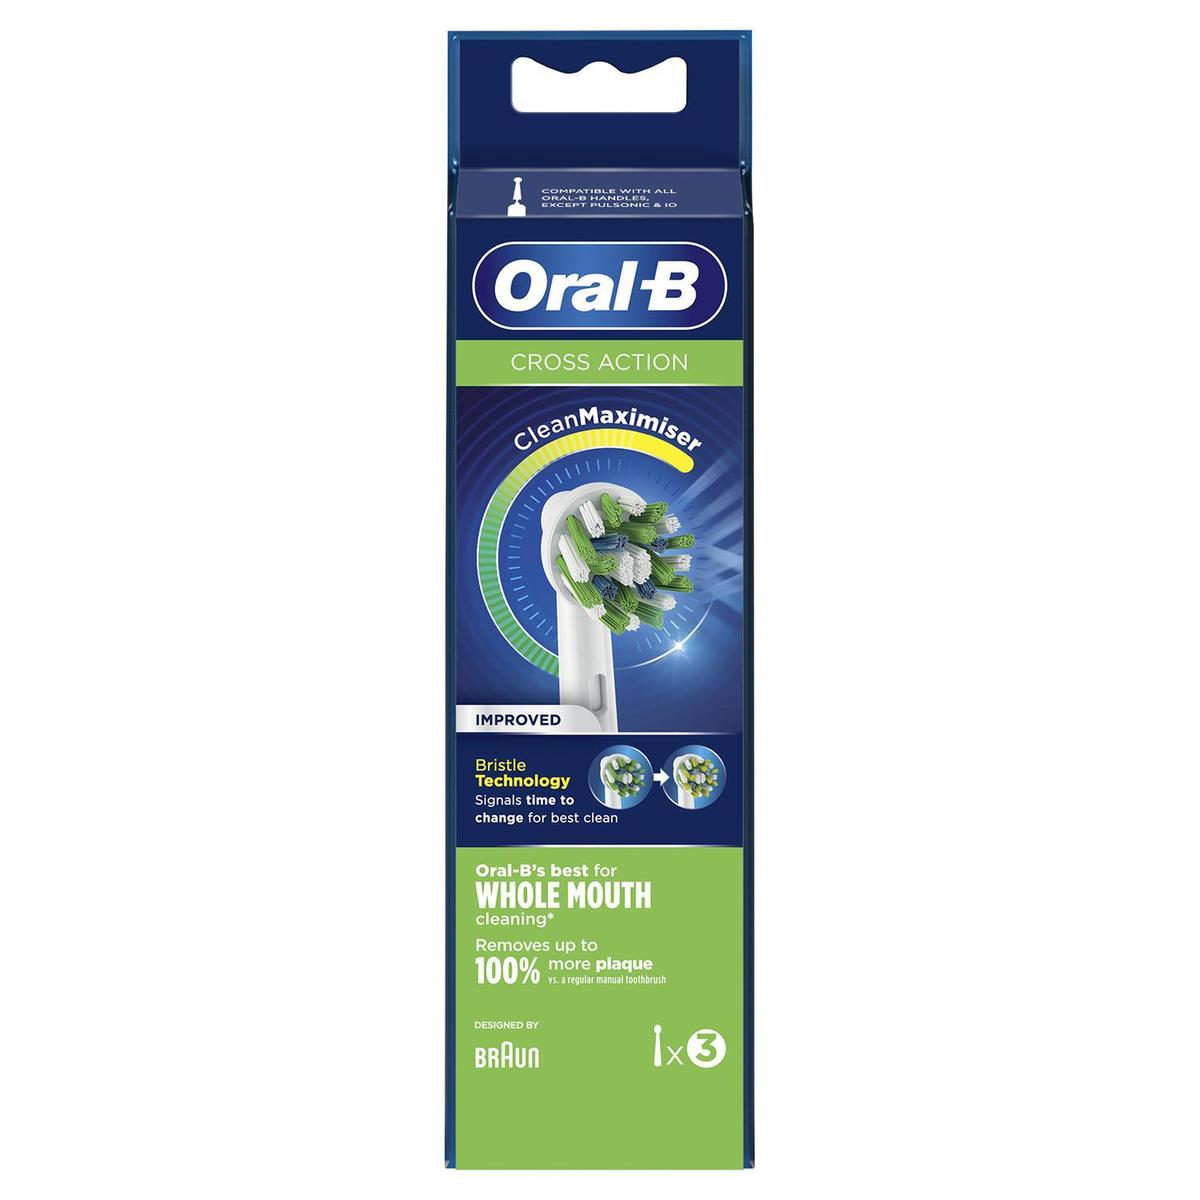 ORAL B 3 x BROSSETTES CROSS ACTION_4210201317104